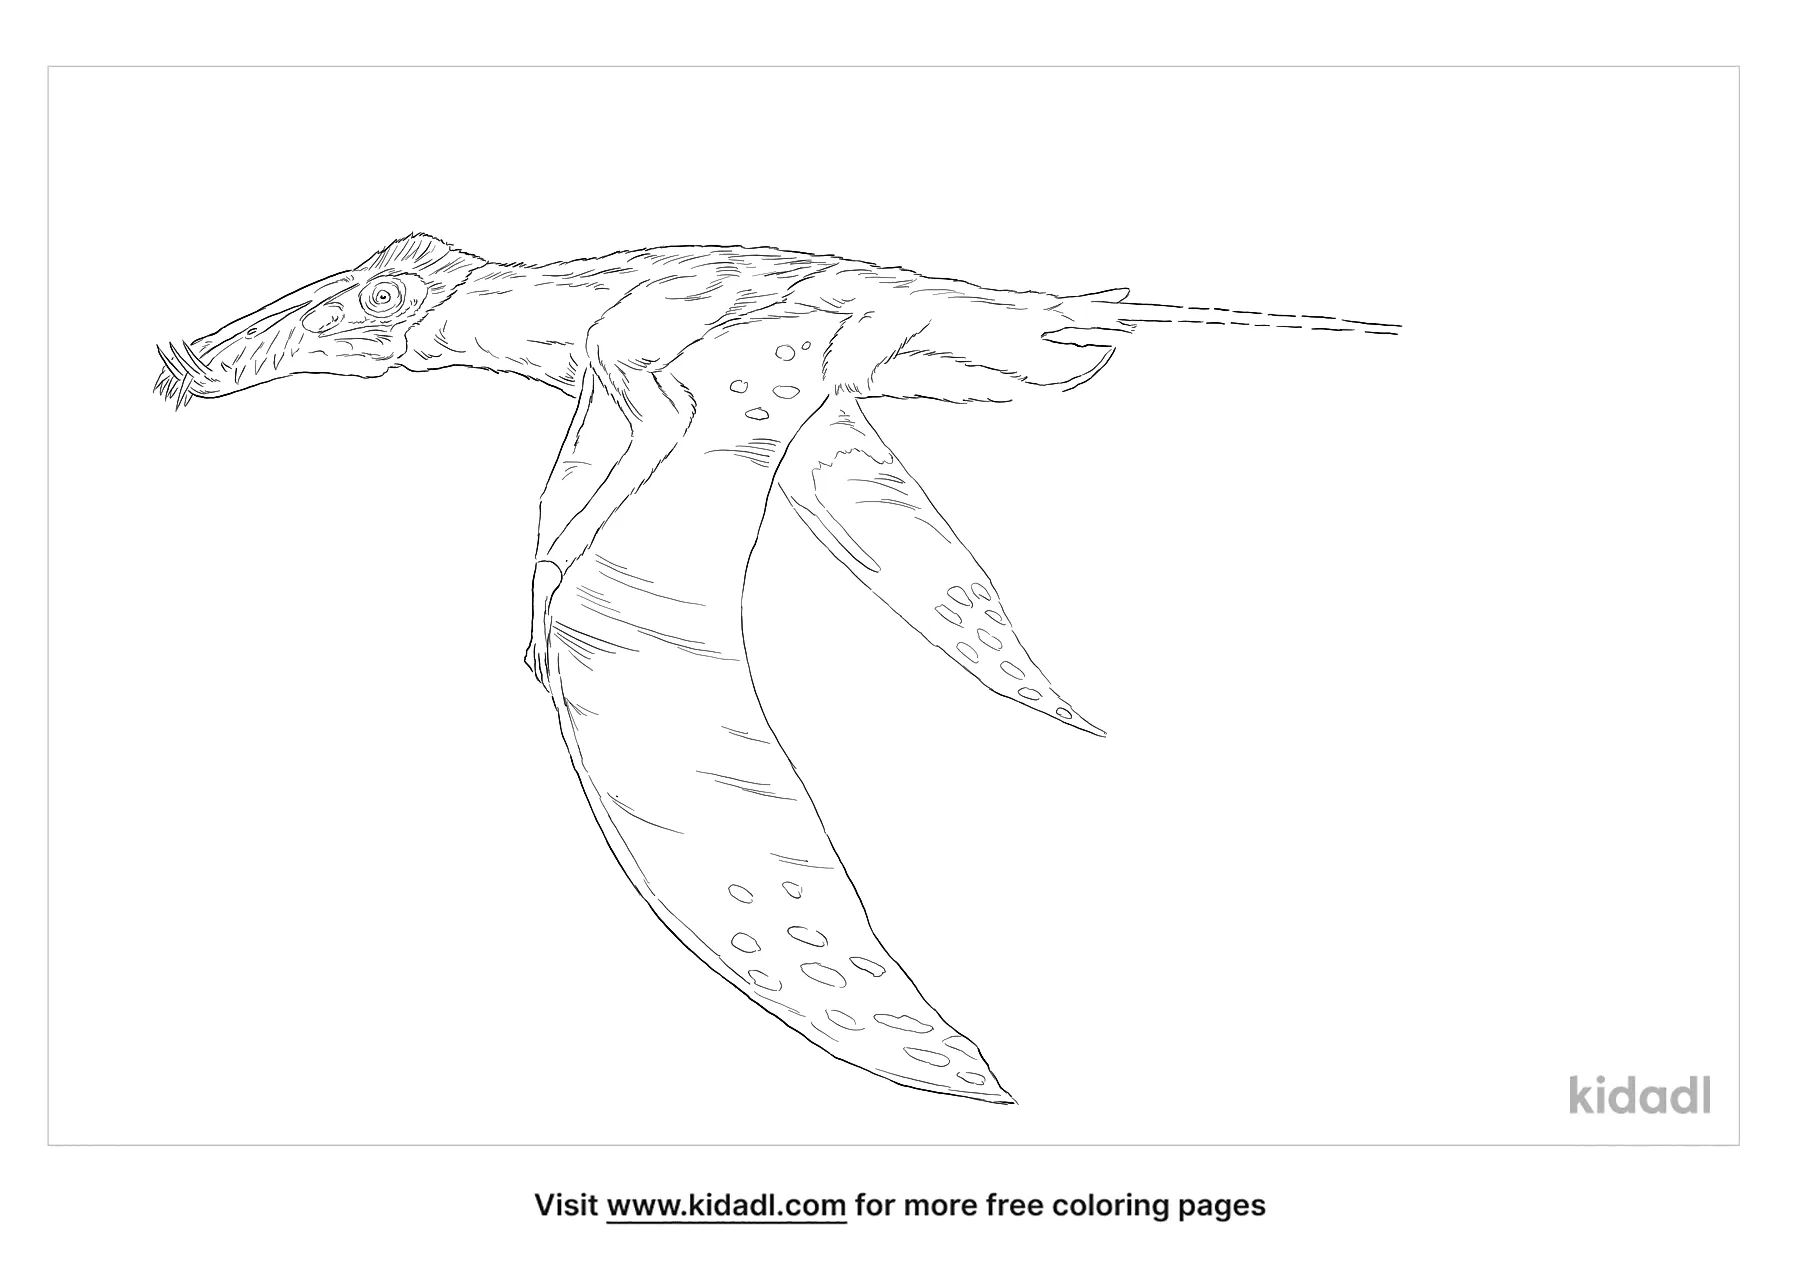 Dorygnathus Coloring Page